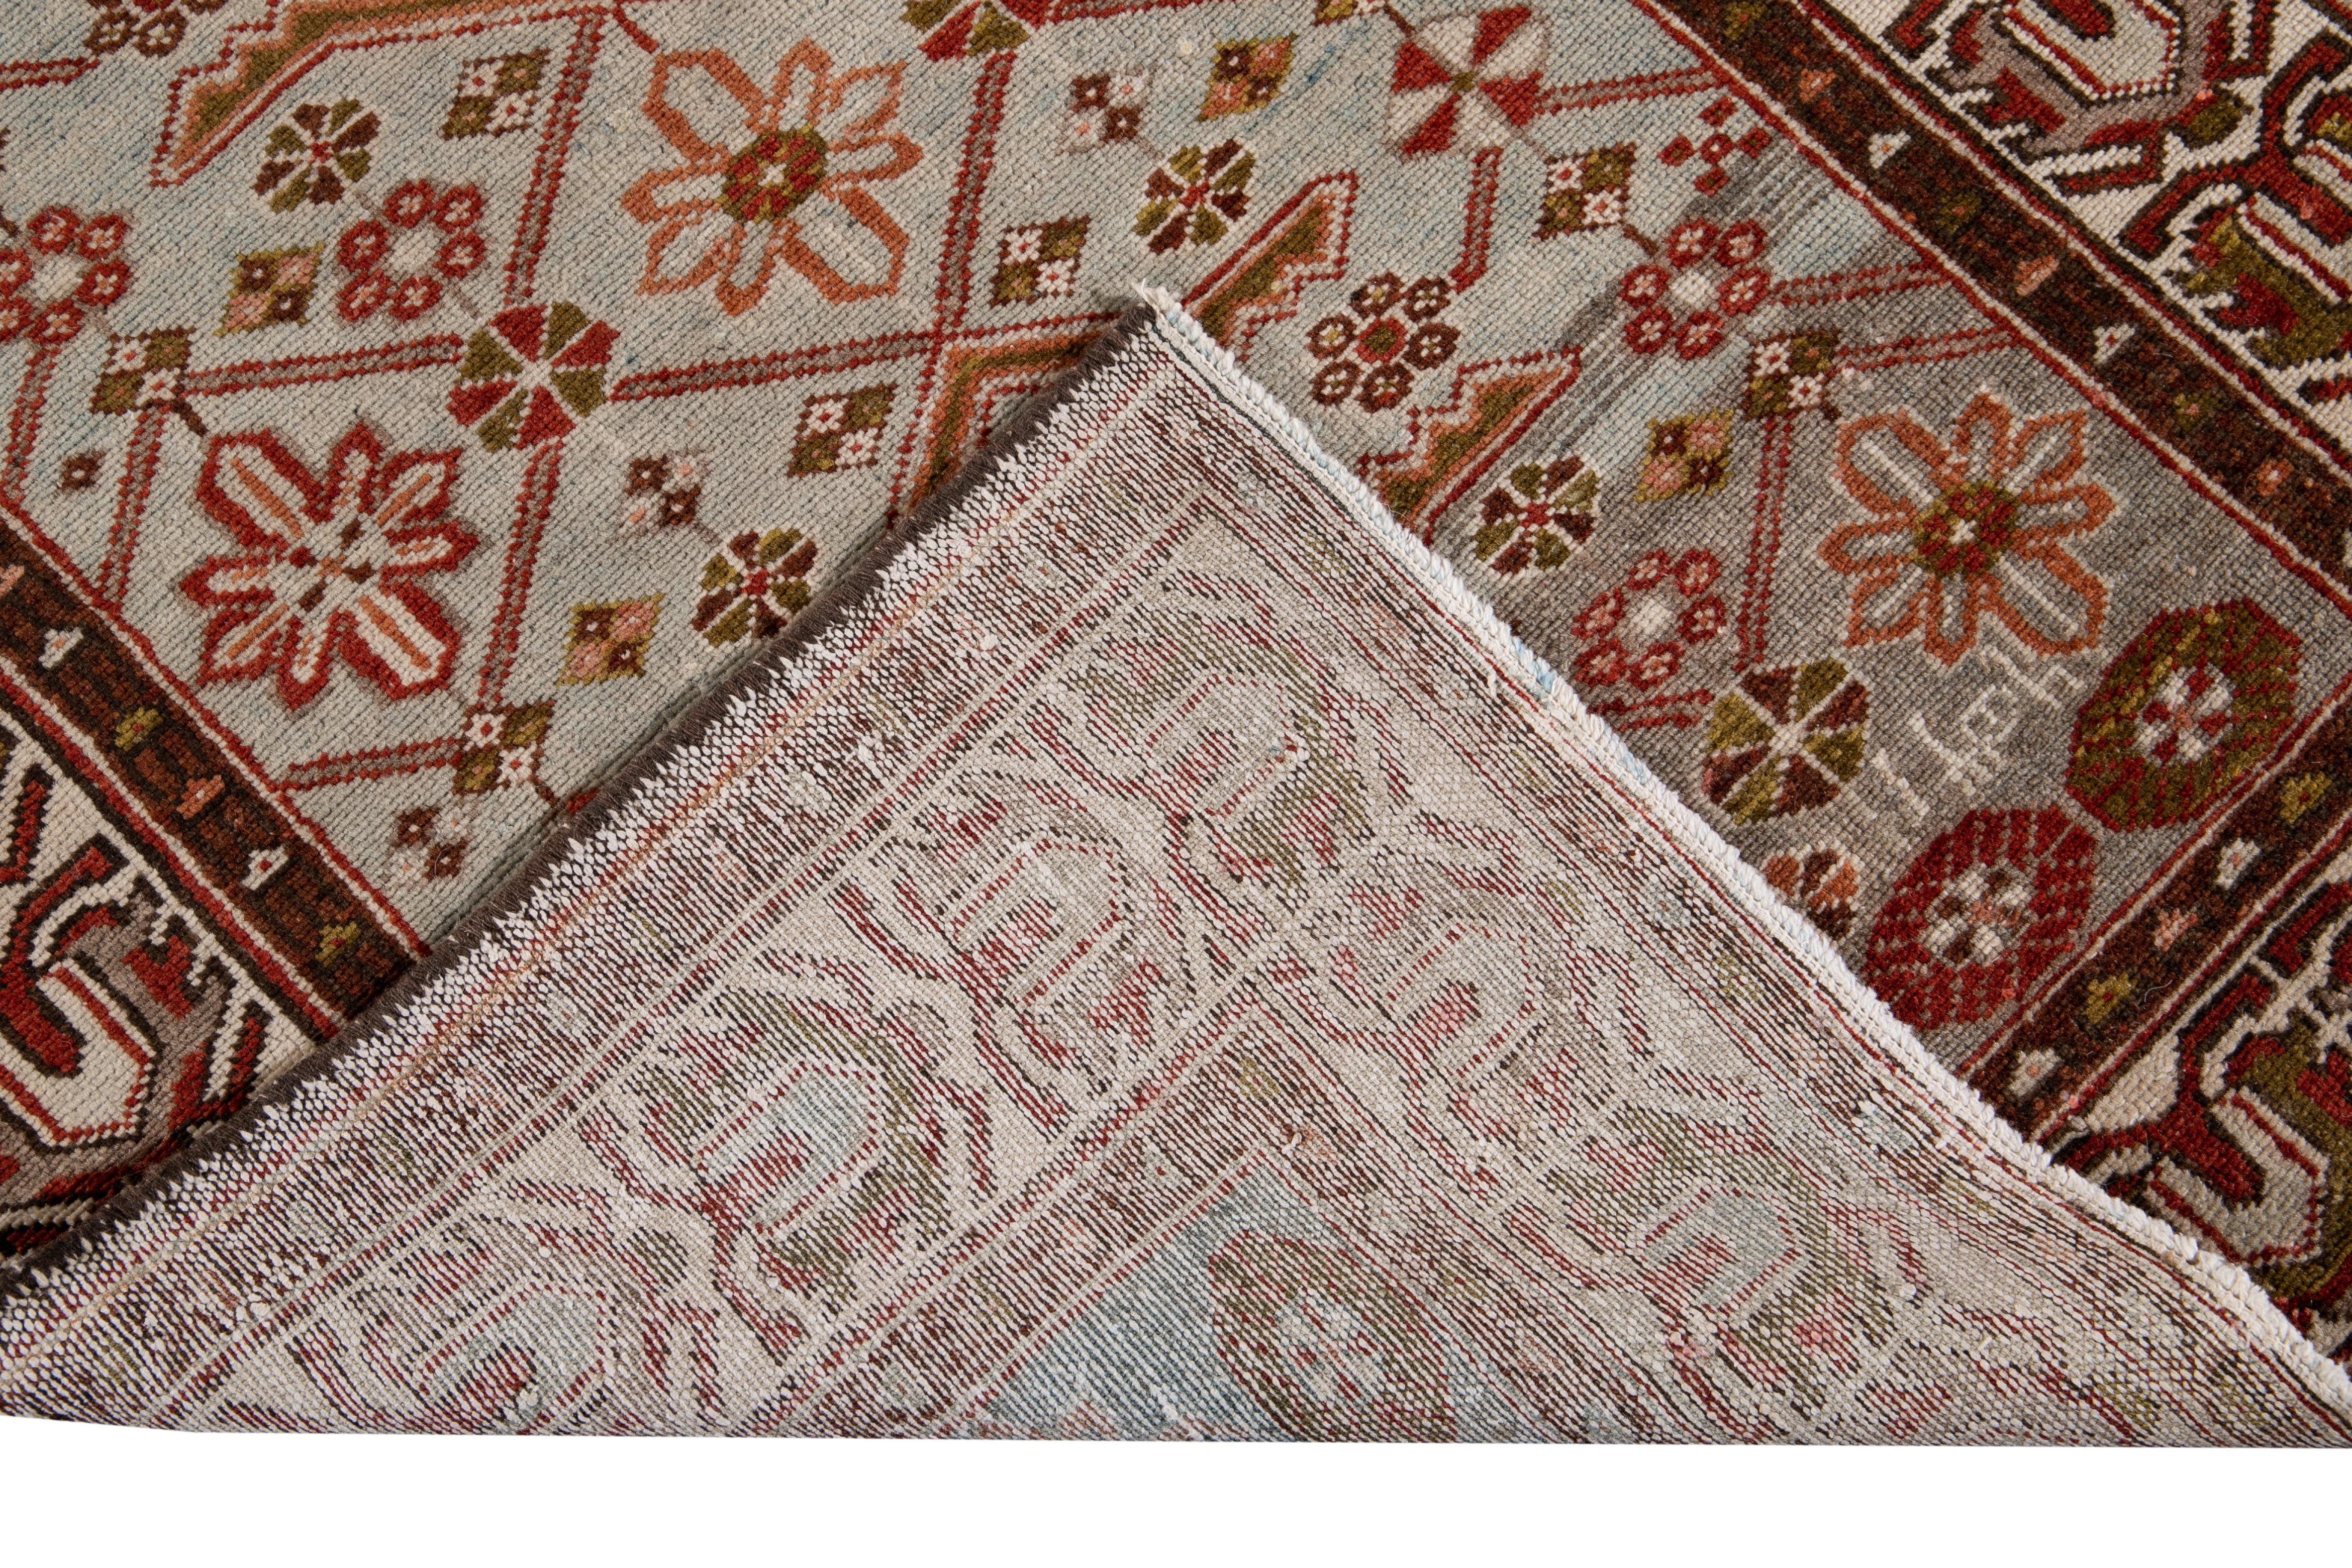 Beautiful antique Malayer hand-knotted wool rug with a grey field. This Malayer piece has brown, peach, and red accents in a gorgeous all-over floral design.

This rug measures: 3'5